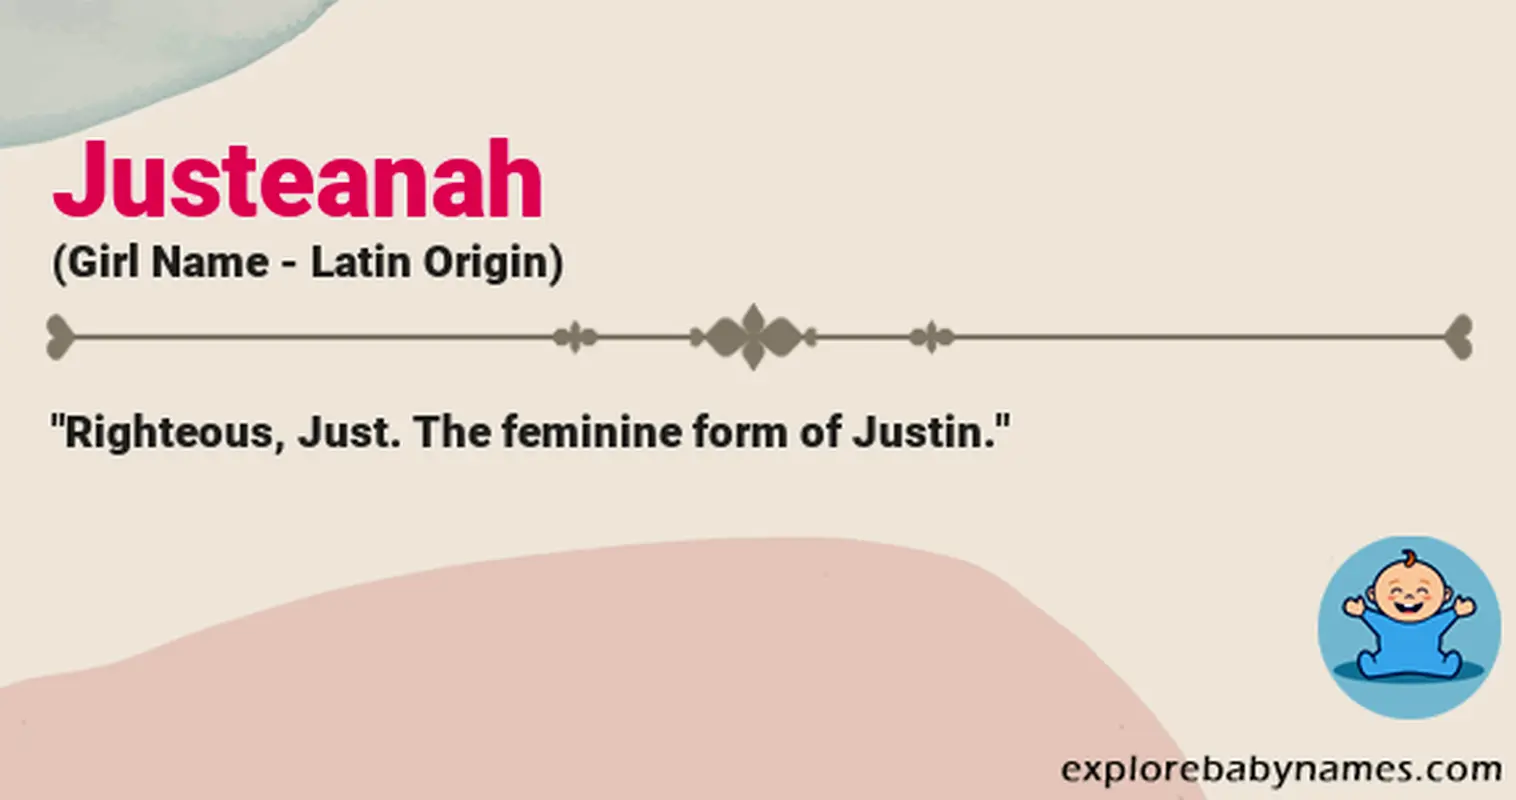 Meaning of Justeanah